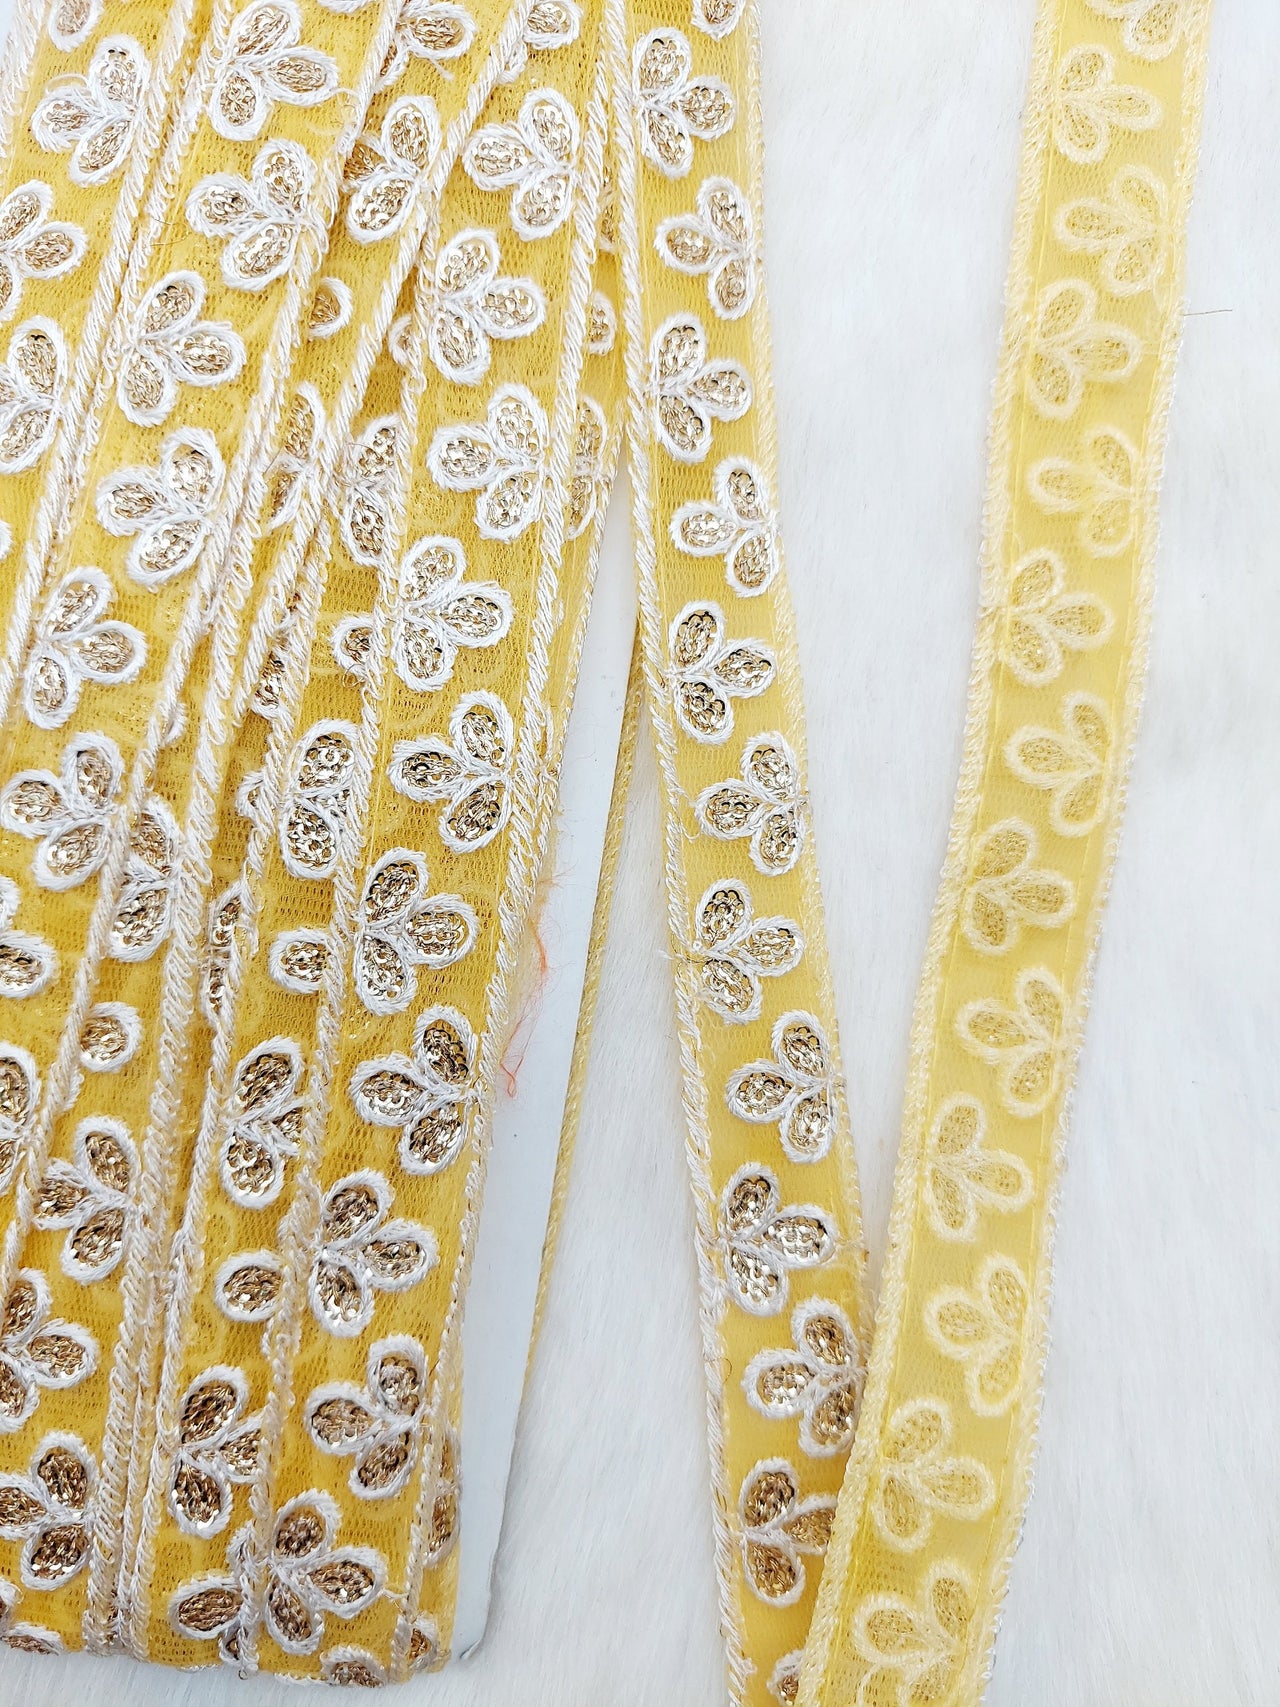 Wholesale Yellow Net Lace Floral Embroidery & Glitter Gold Sequins, Indian Wedding Border, Gifting Ribbon Costume Trim Fashion Trimming